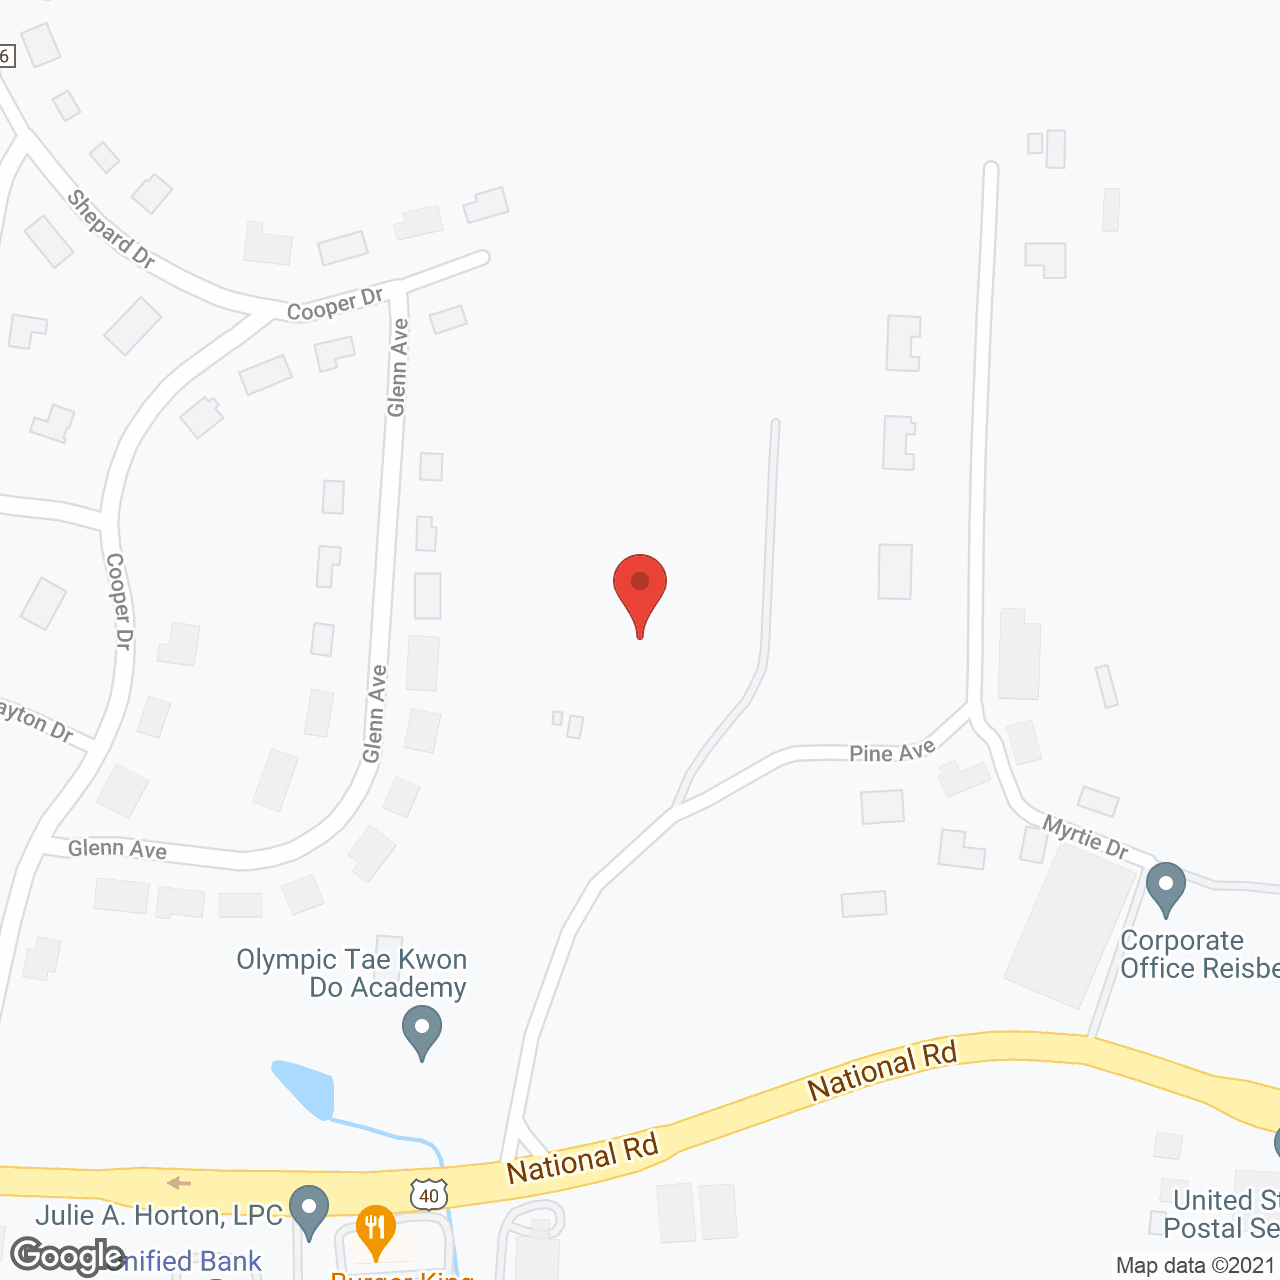 Park Health Ctr in google map